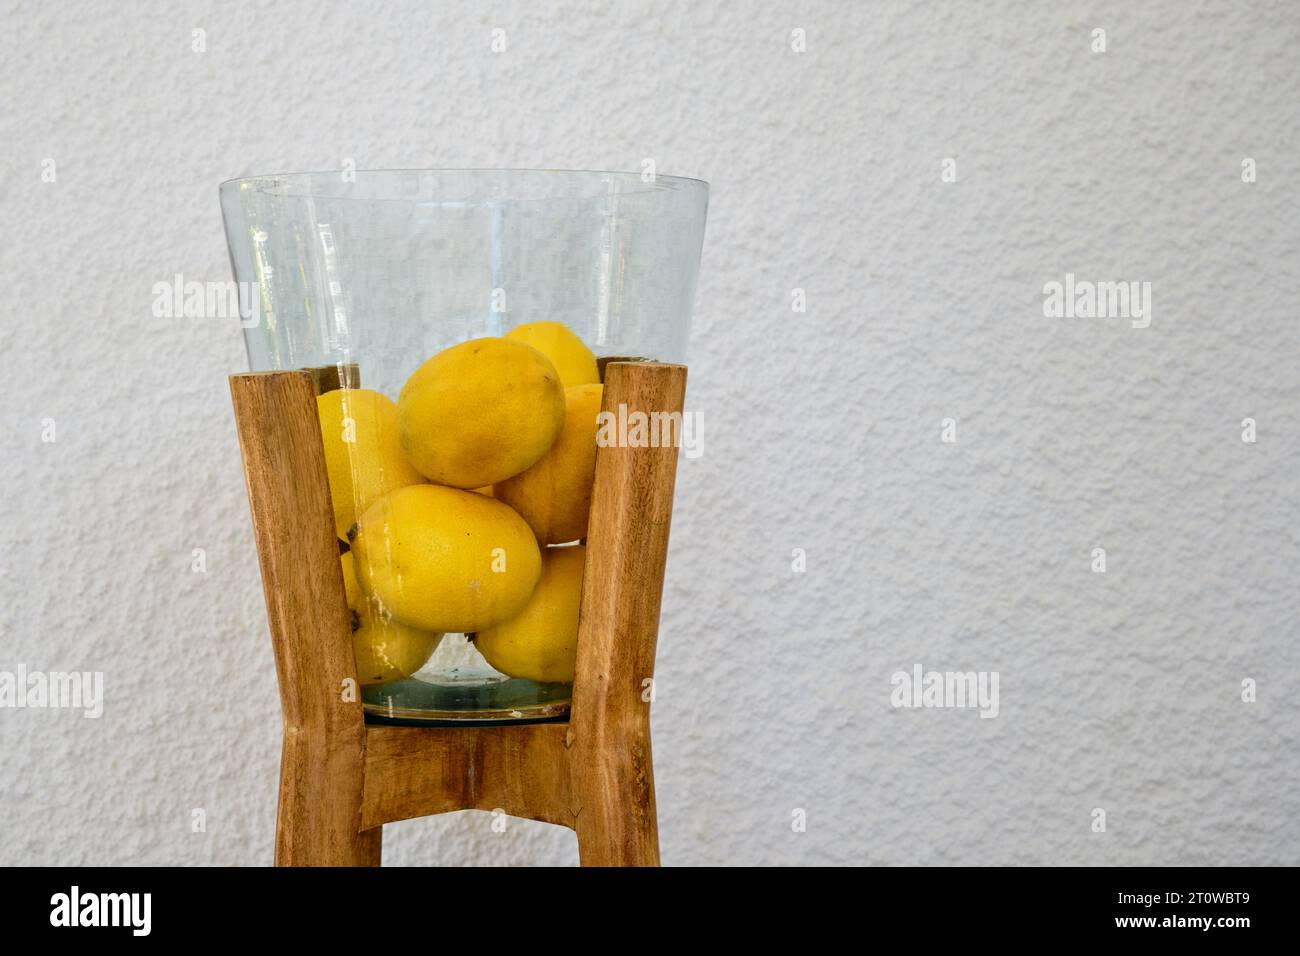 Decorative glass bowl or vase with wooden feet filled with fresh lemons against white wall background. Stock Photo